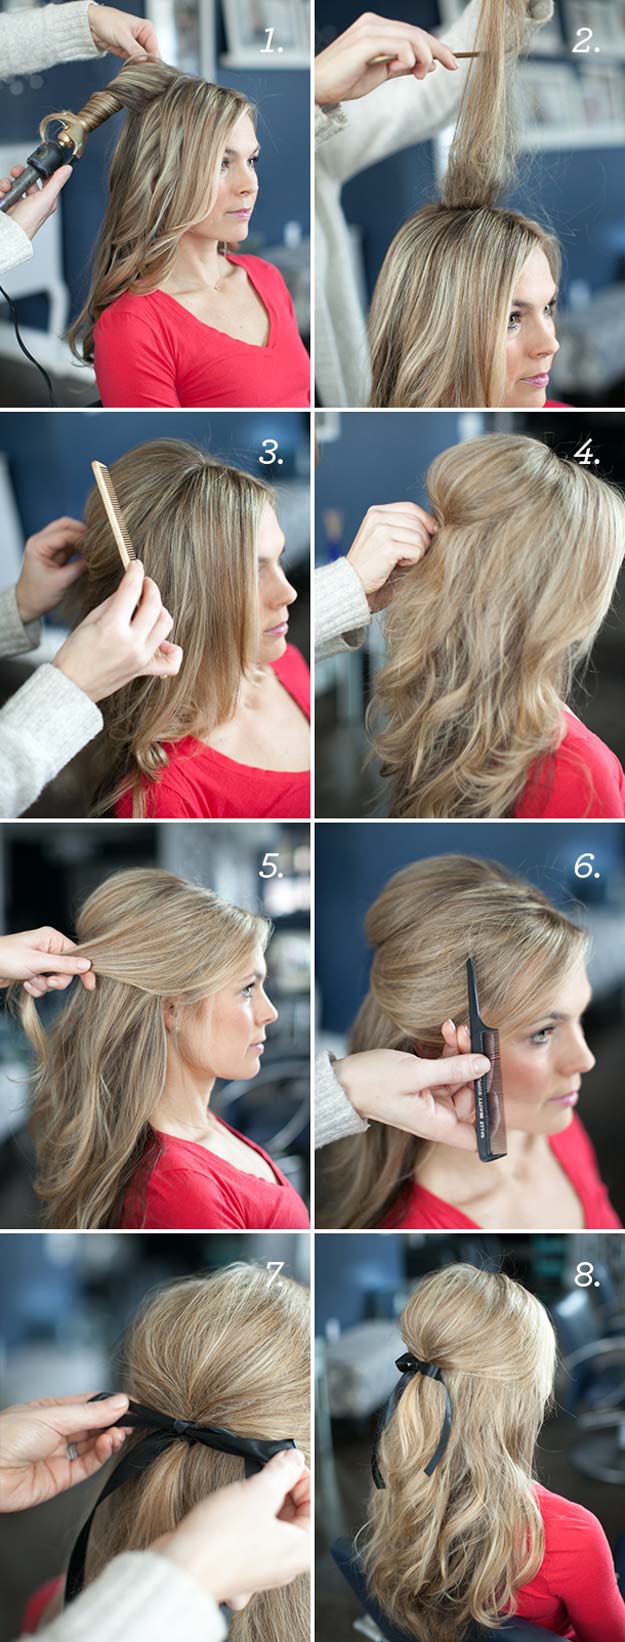 Best Hairstyles for Long Hair - Put a Bow - Step by Step Tutorials for Easy Curls, Updo, Half Up, Braids and Lazy Girl Looks. Prom Ideas, Special Occasion Hair and Braiding Instructions for Teens, Teenagers and Adults, Women and Girls 